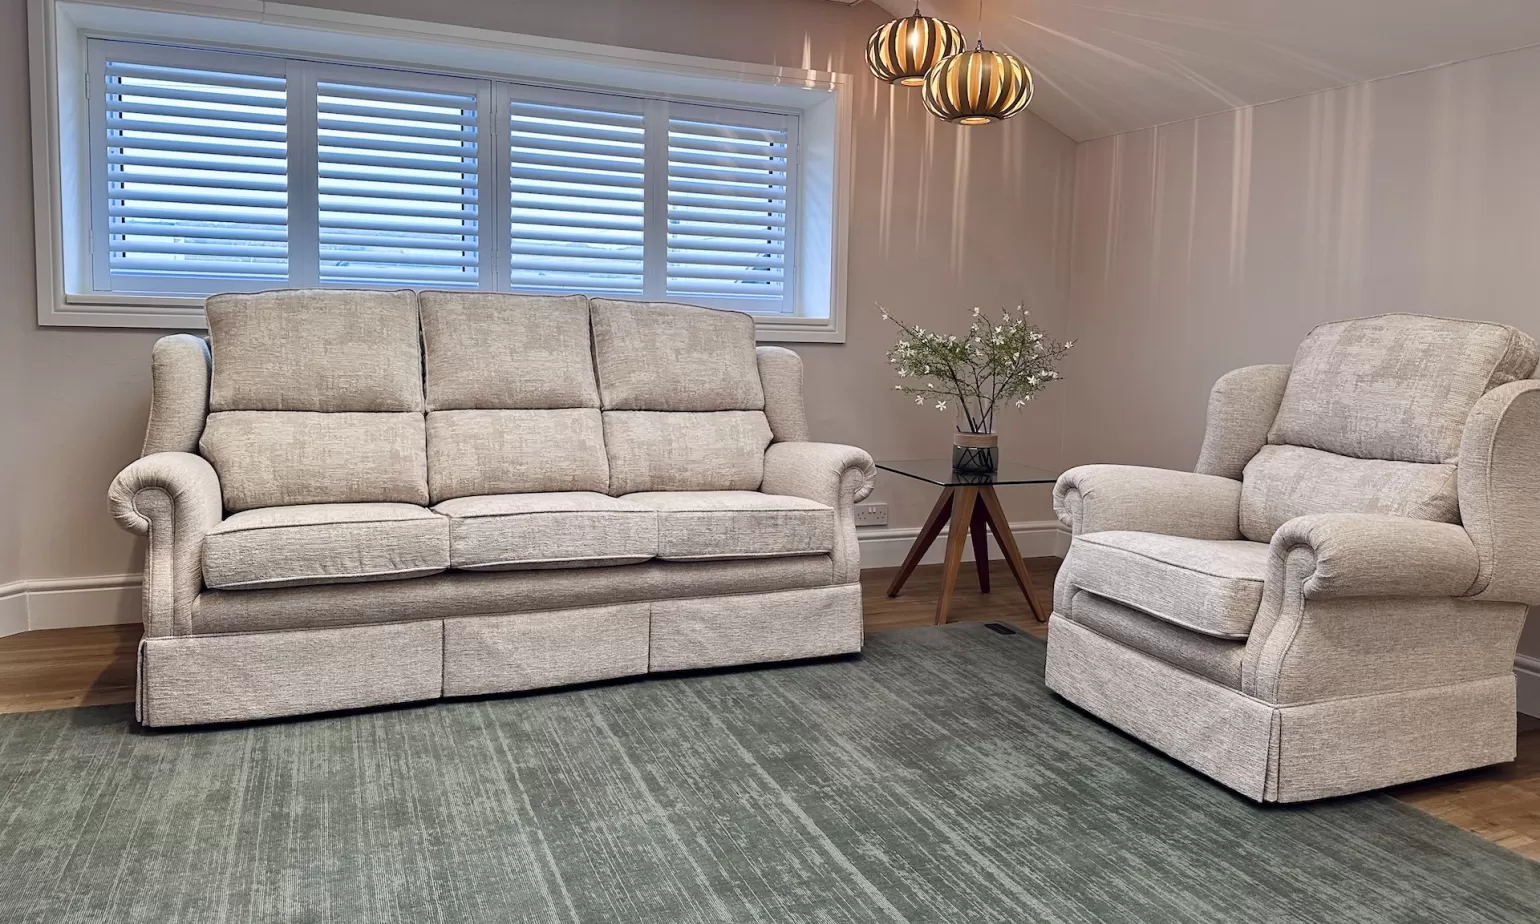 Our most popular and traditionally designed range of sofas and chairs providing the ultimate in comfort and style. The high backs are supported with wings, and extra lumbar support is given with a split back cushion. The Eaton is a favourite choice, and has a lot of attention to detail.
